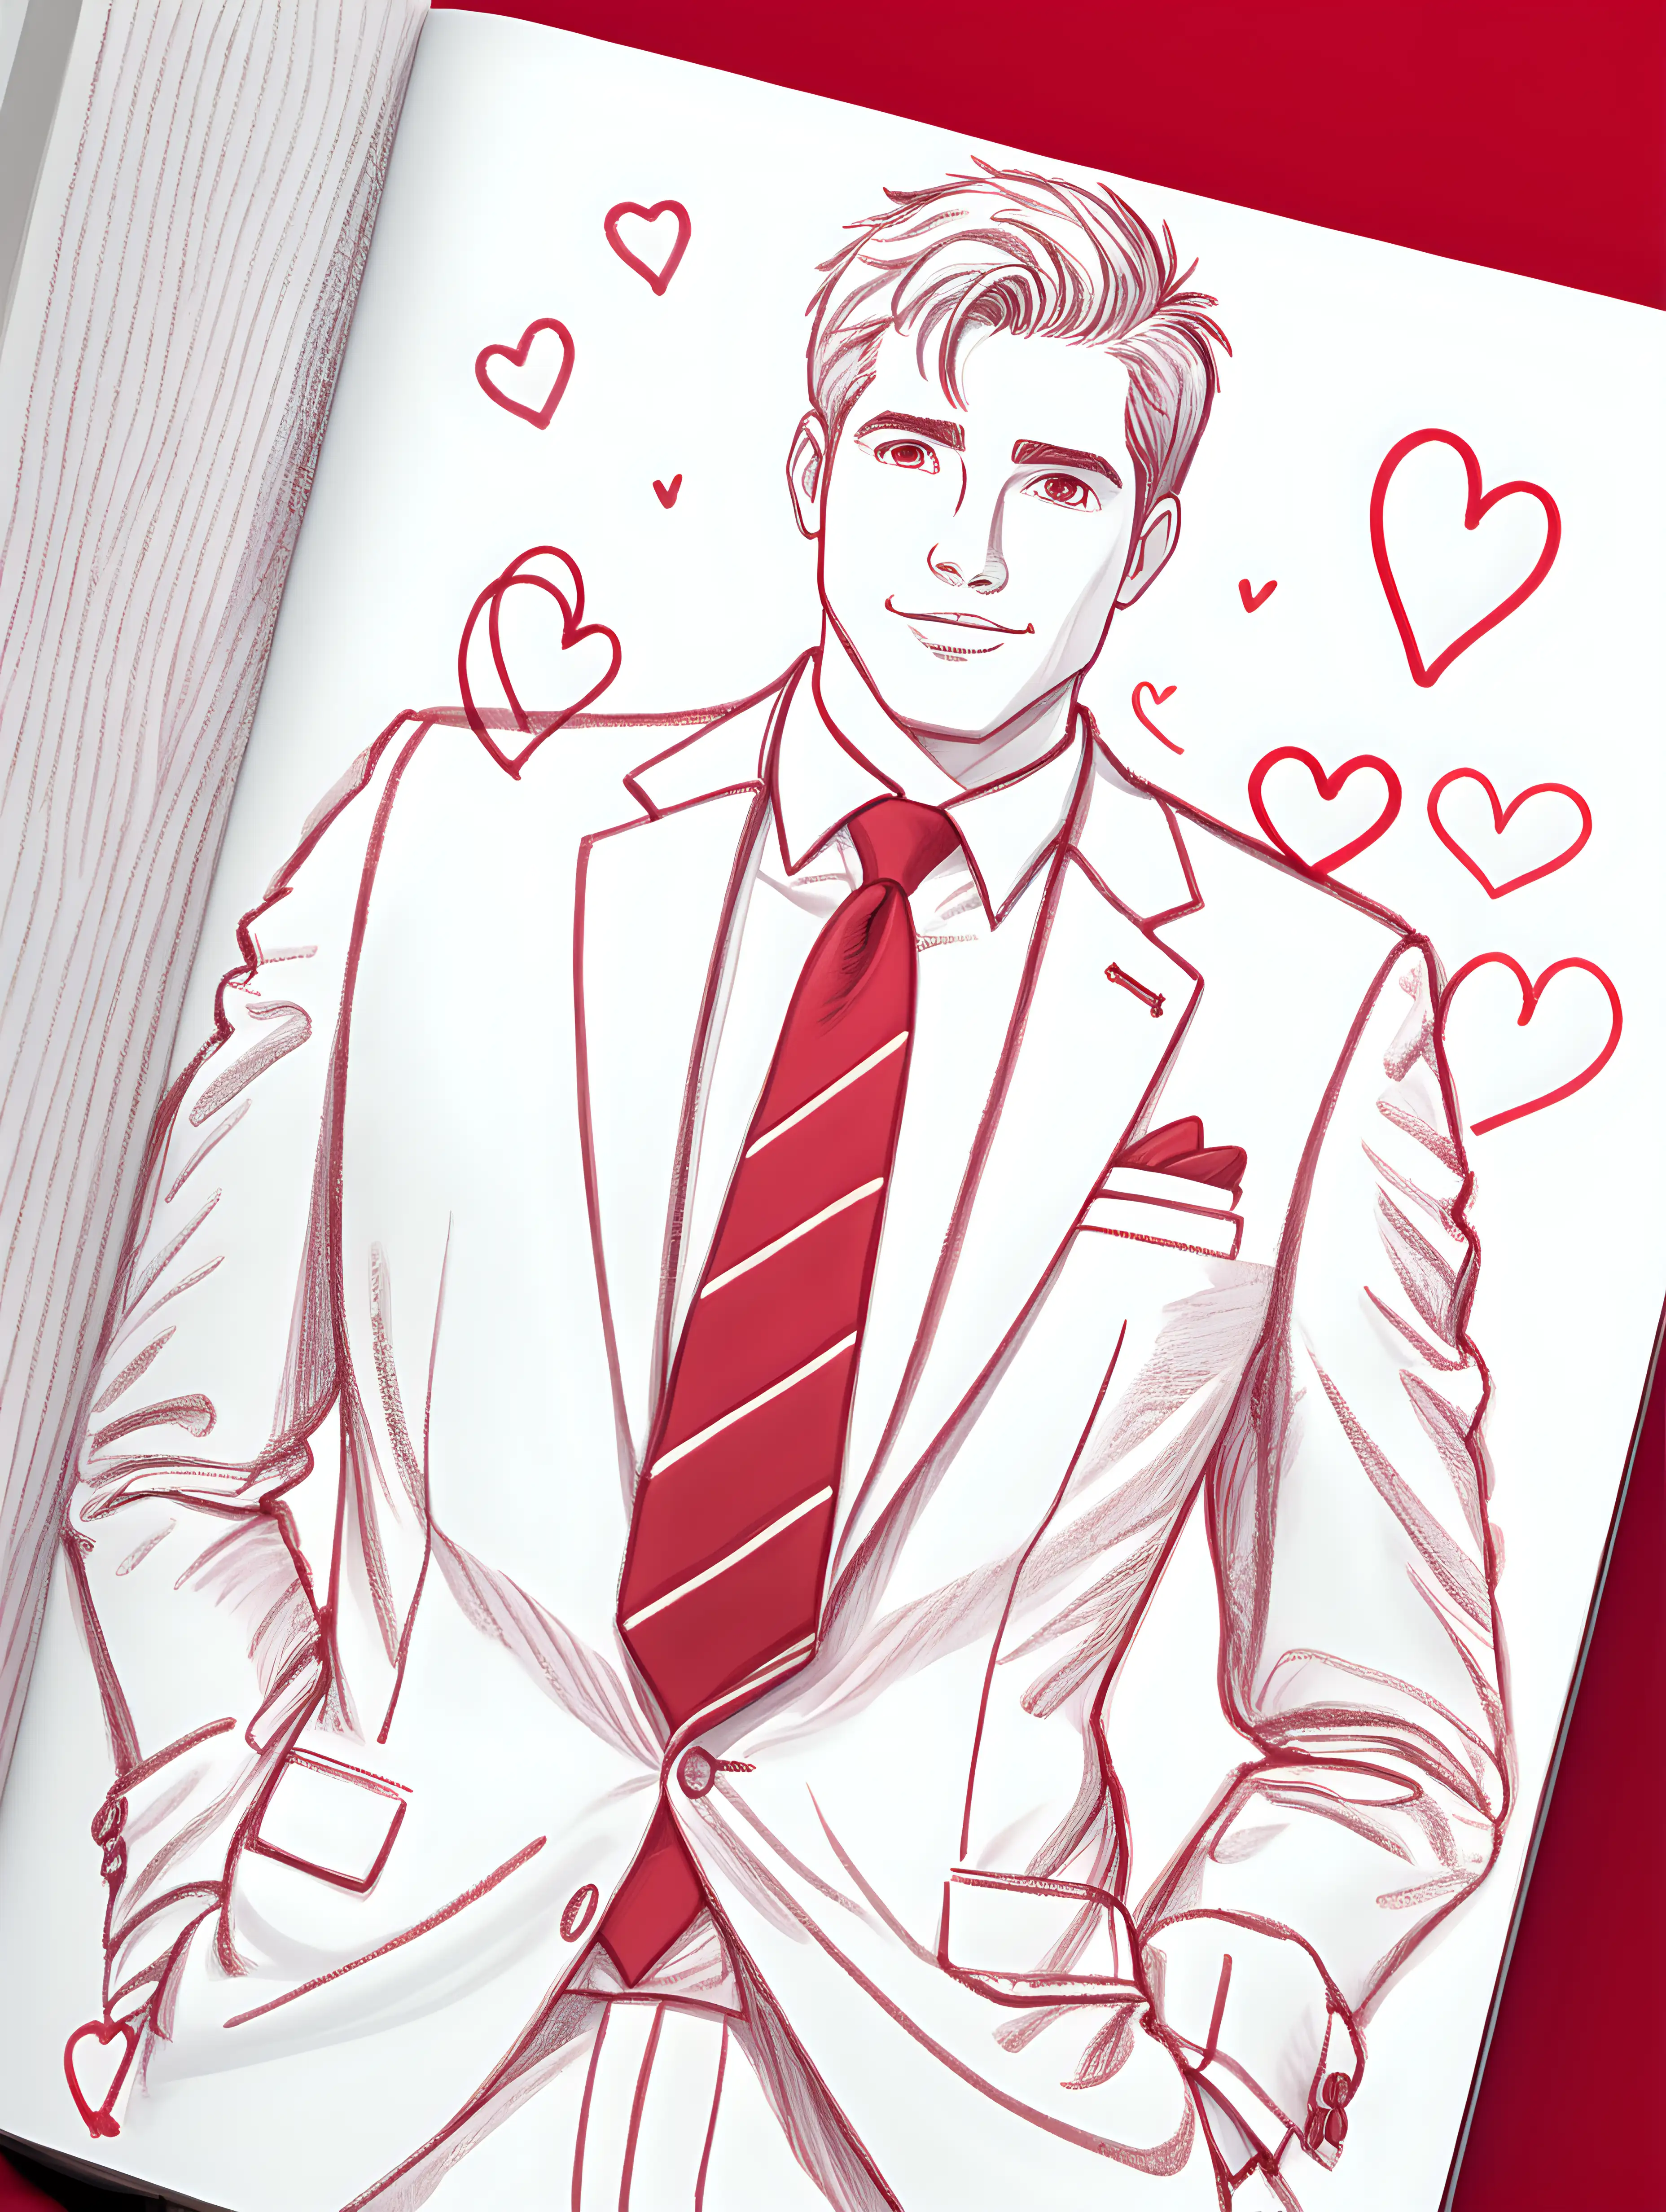 A book cover close-up sketch of a desugner suit and crimson tie, zoom in on the collar, in a rom-com animation style of THAT GUY book cover, with red hearts sketched in the background